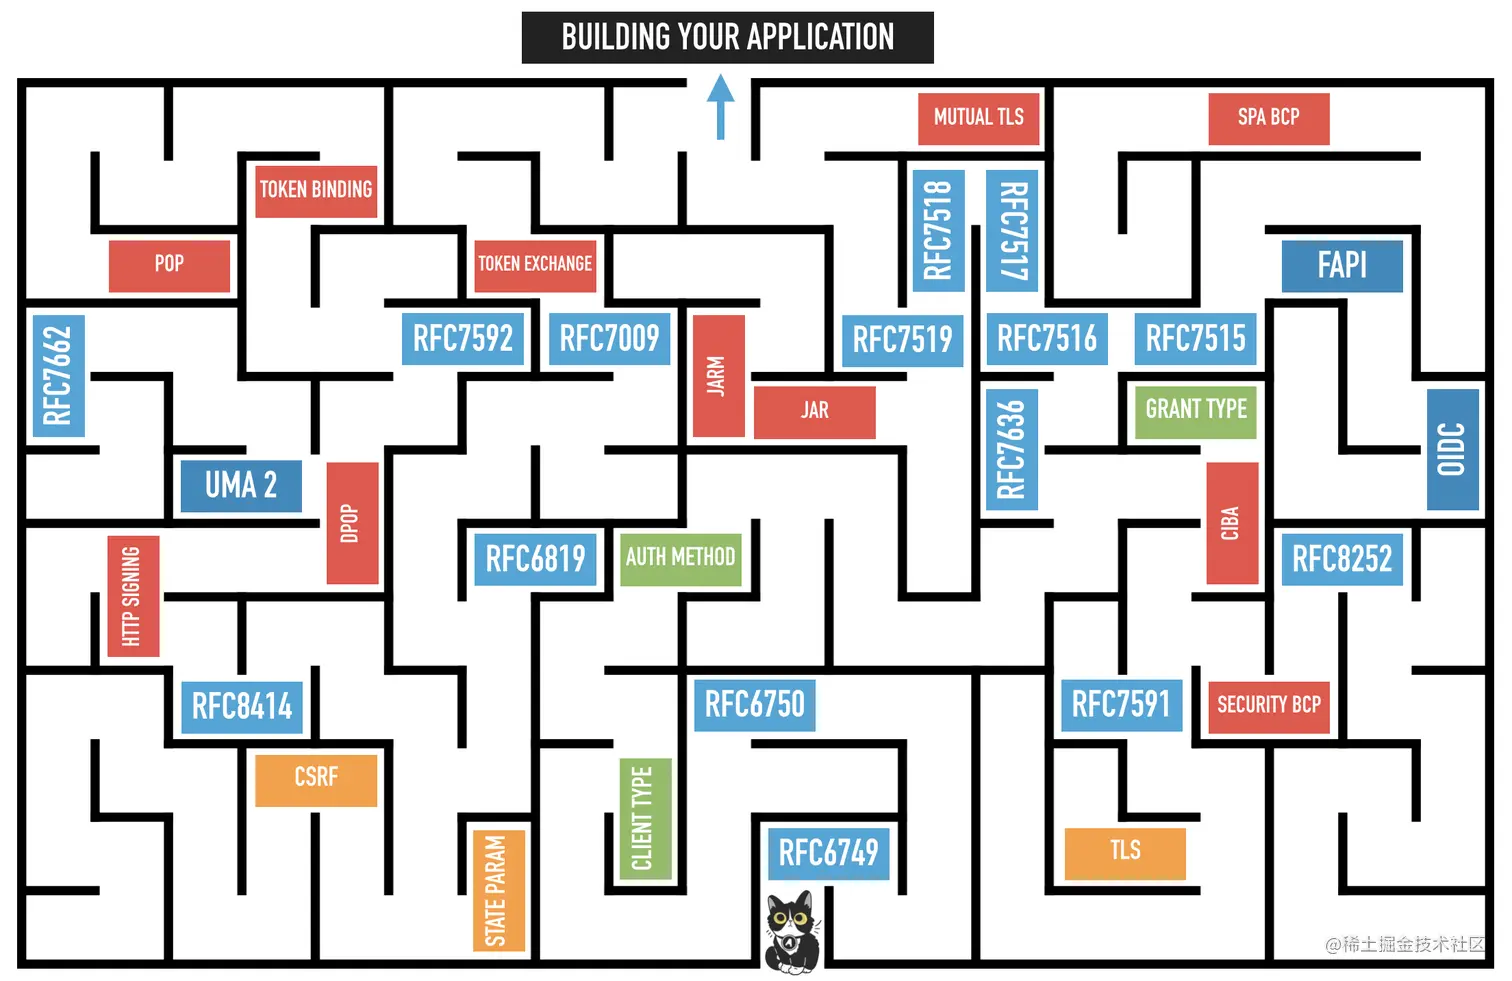 oauth-maze.png